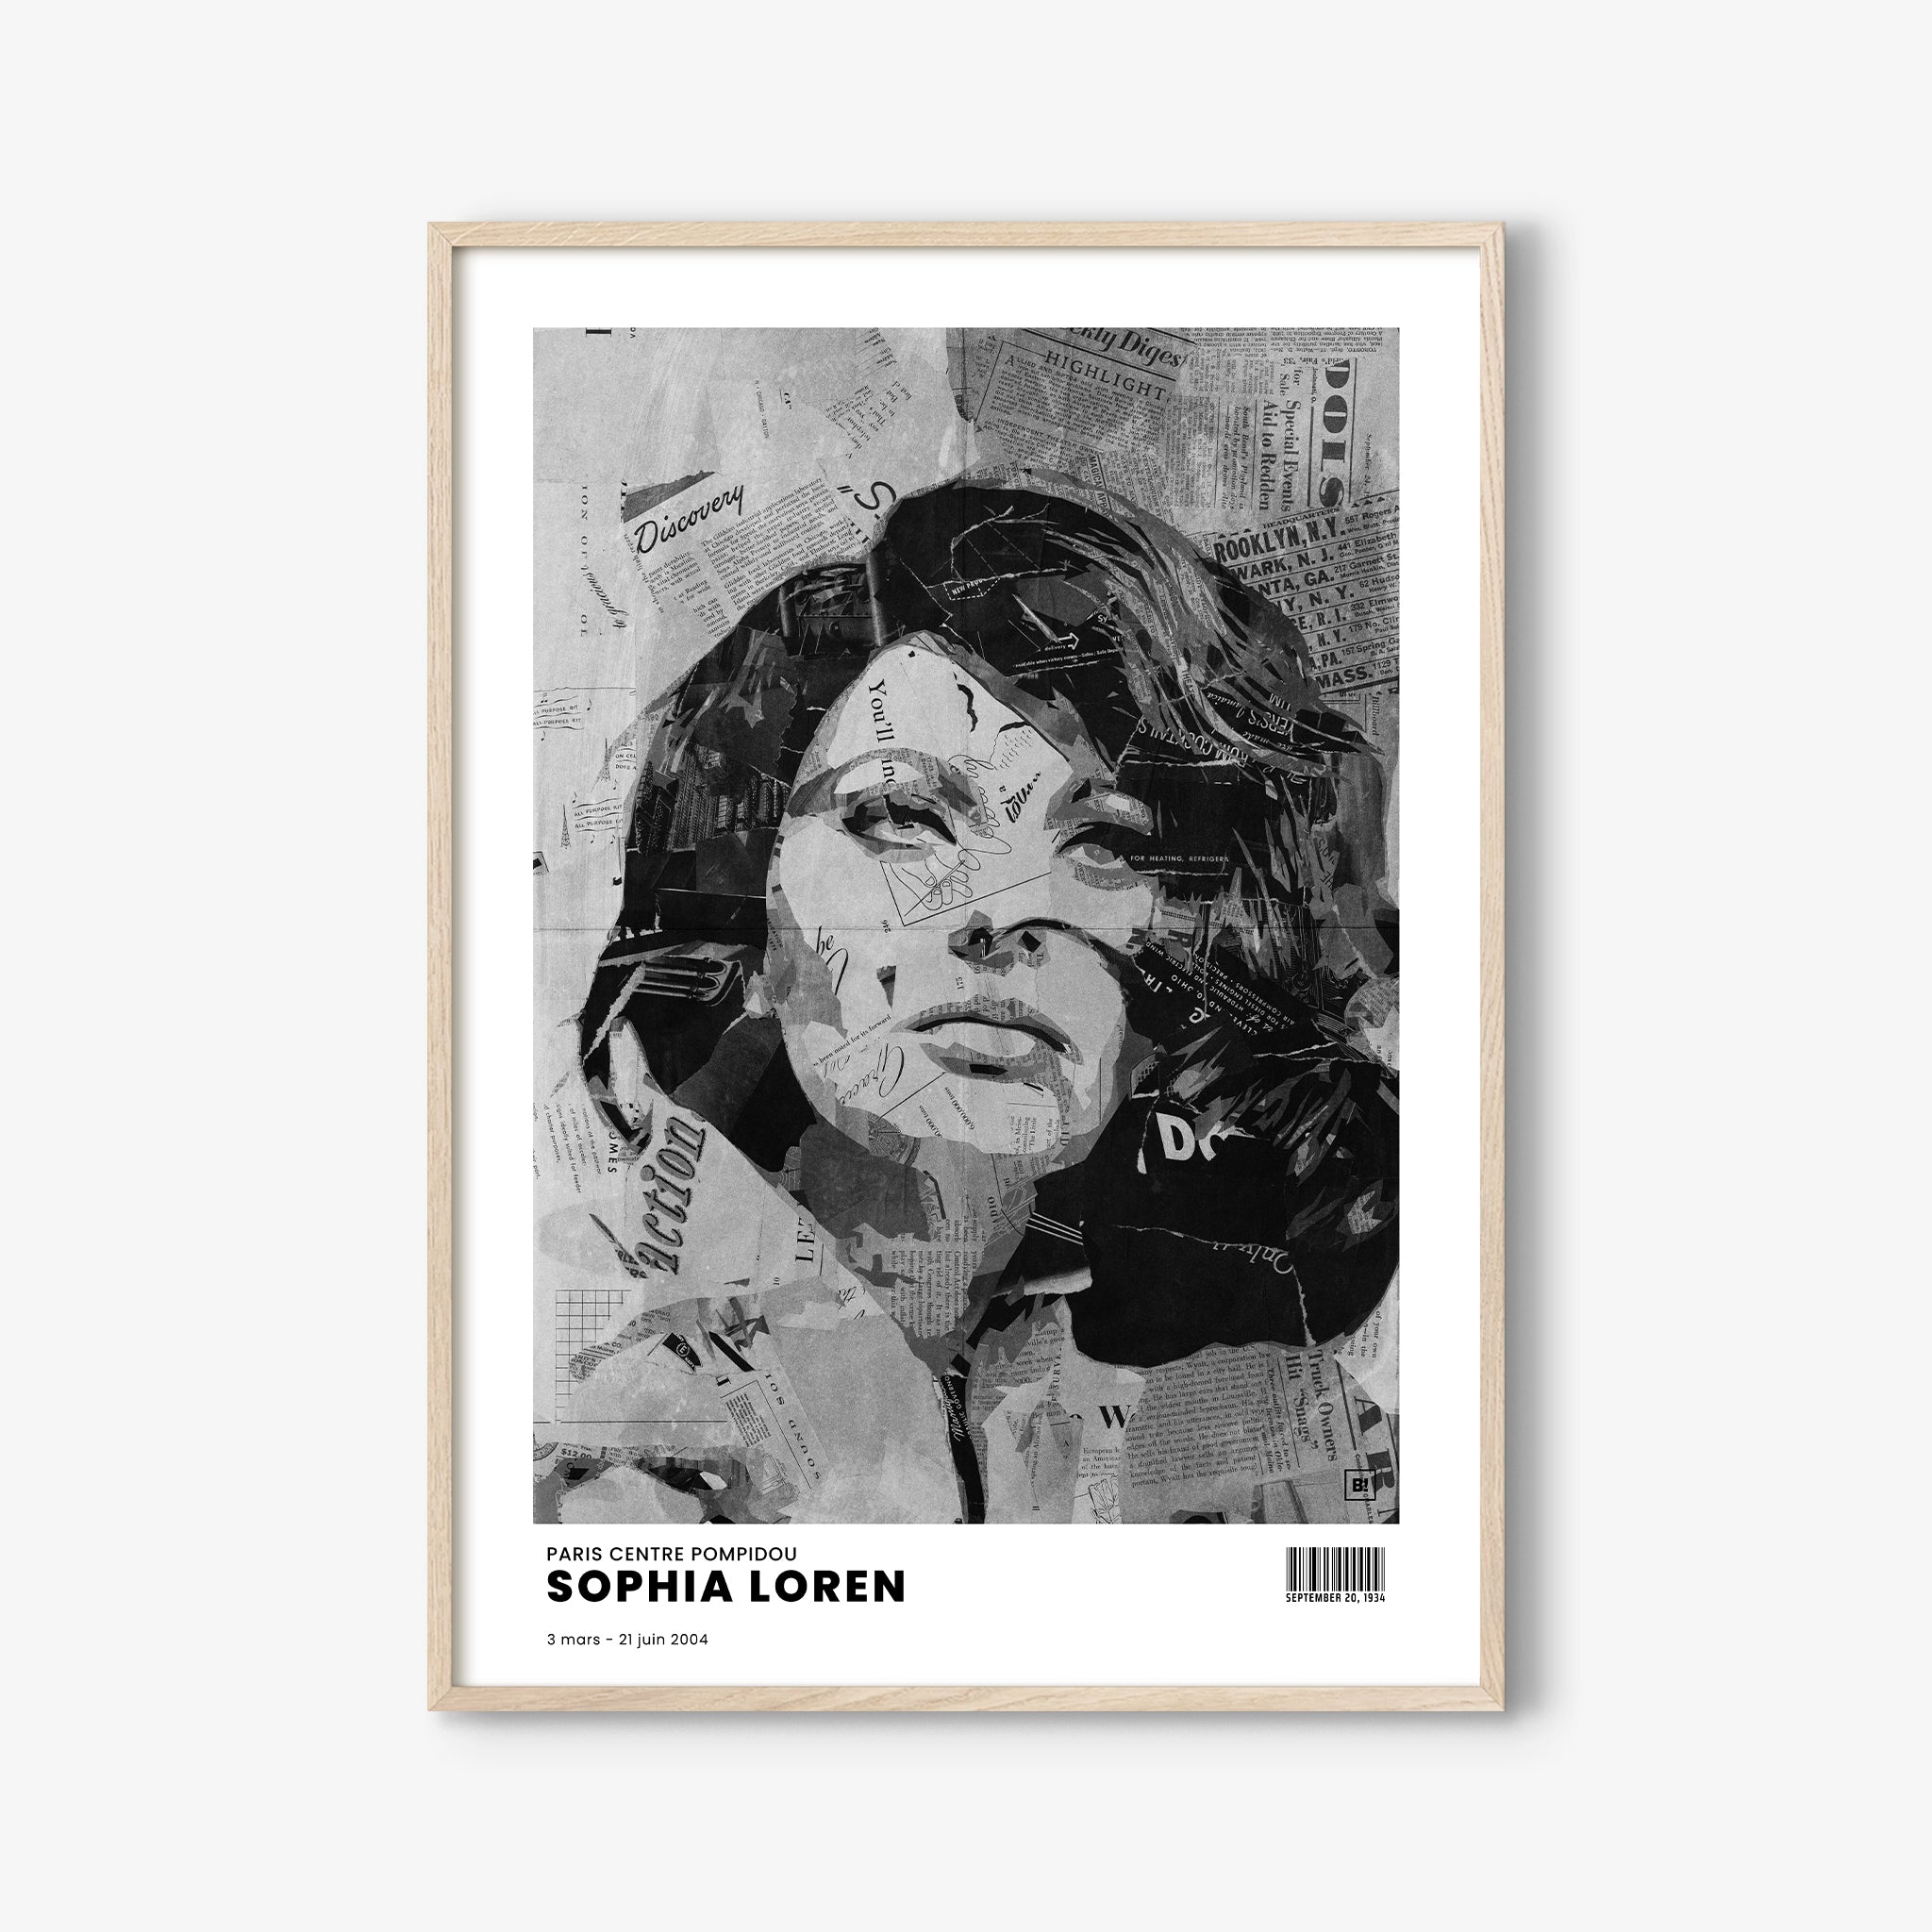 Be inspired by Iconic Sophia Loren Paris Centre Pompidou Exhibition Art Print. The artwork is presented in a white oak frame that captures its timeless beauty in every detail.